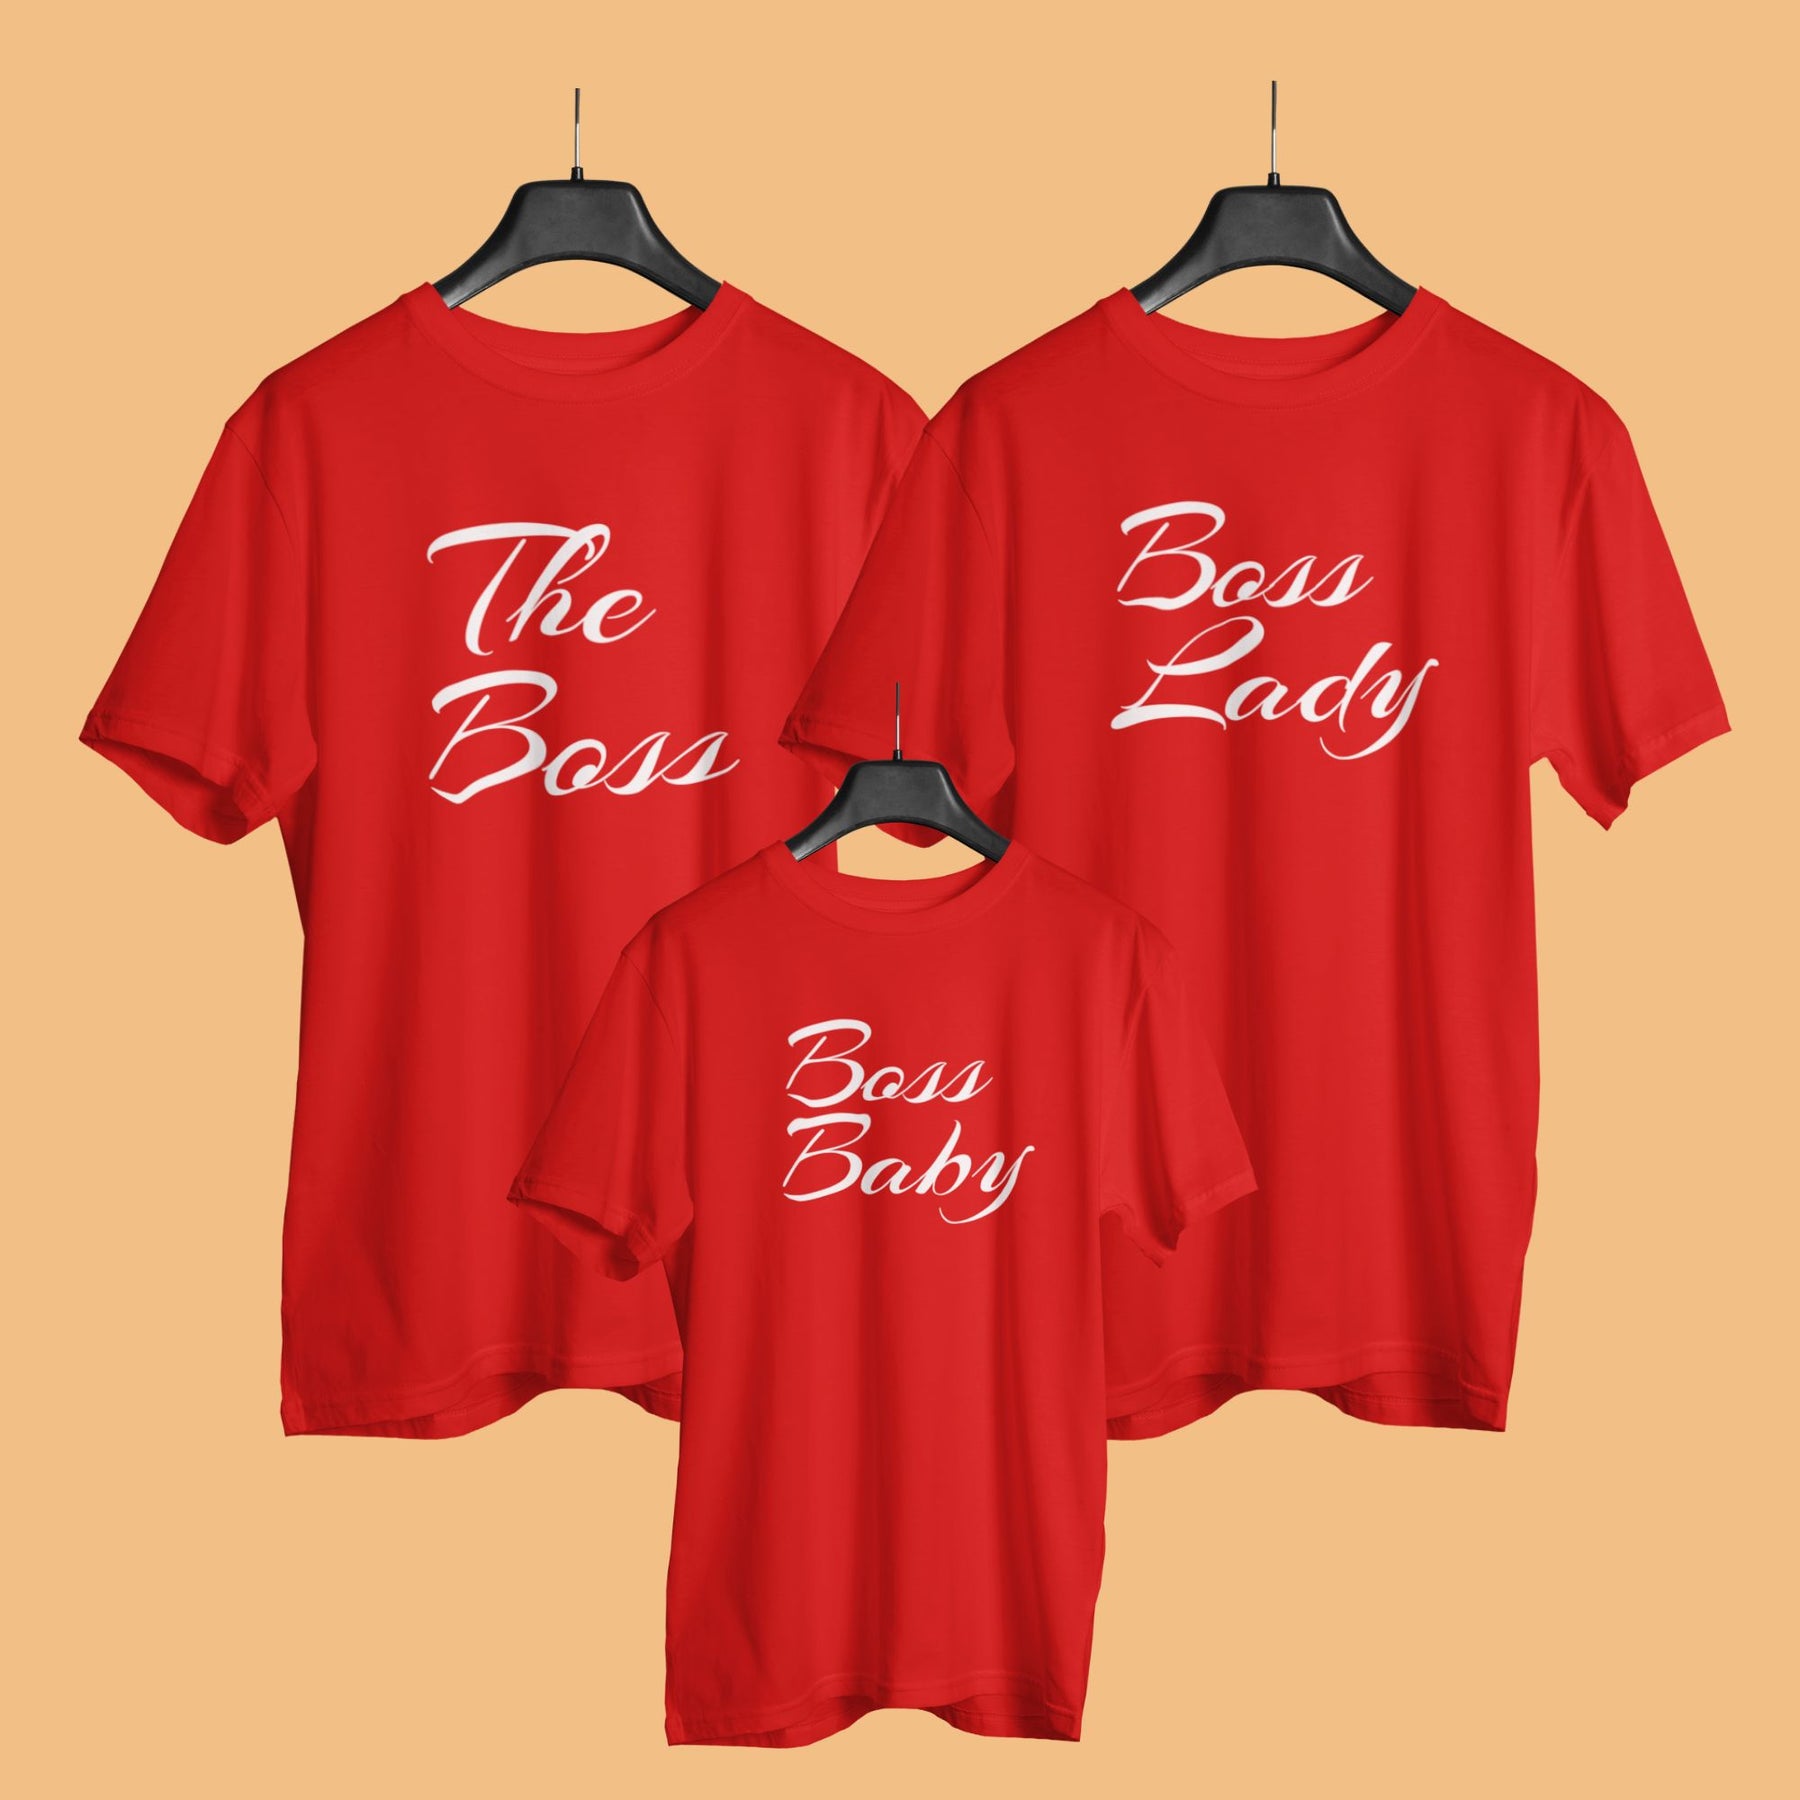 boss-lady-matching-family-red-t-shirts-for-mom-dad-son-daughter-gogirgit-hanger